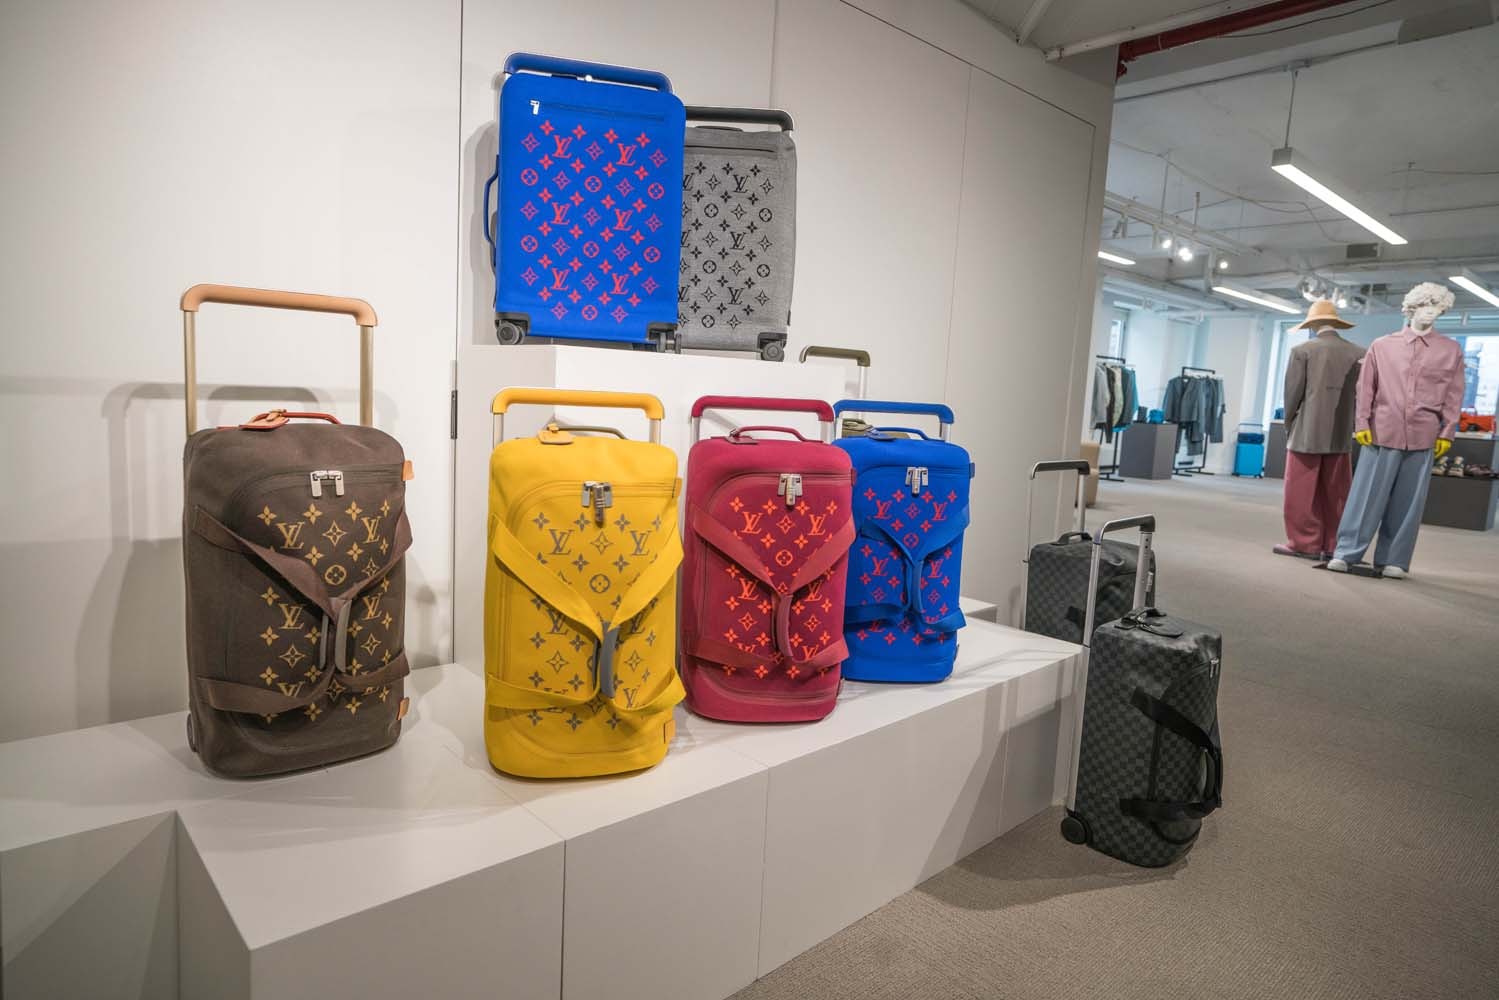 Louis Vuitton Spring Summer 20 Showroom Preview